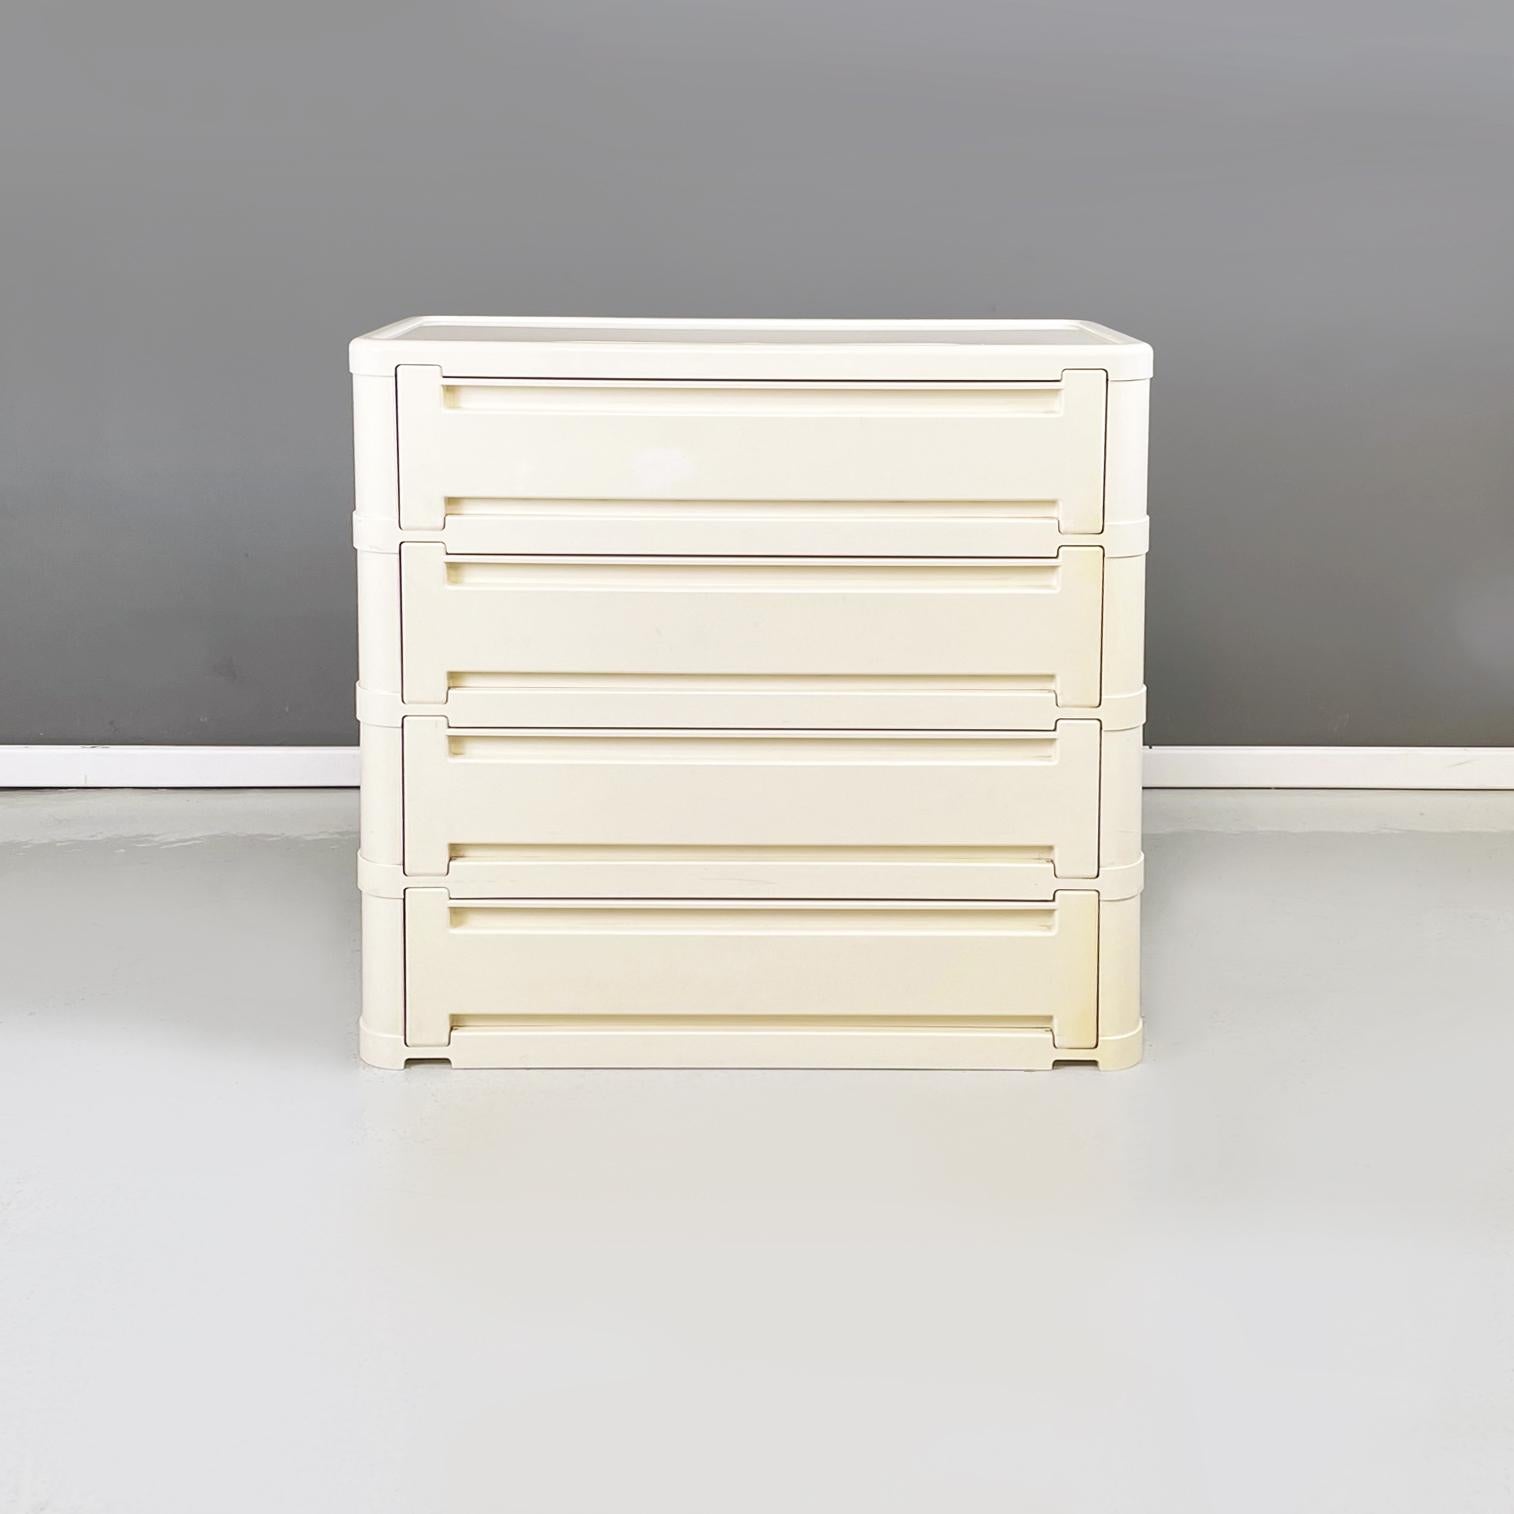 Italian space age modular chest of drawer 4964 in white plastic by Olaf Von Boh for Kartell, 1970s
Modular chest of drawers mod. 4964 with a rectangular base with rounded corners, in white plastic. The shoe rack is made up of 4 modules and each